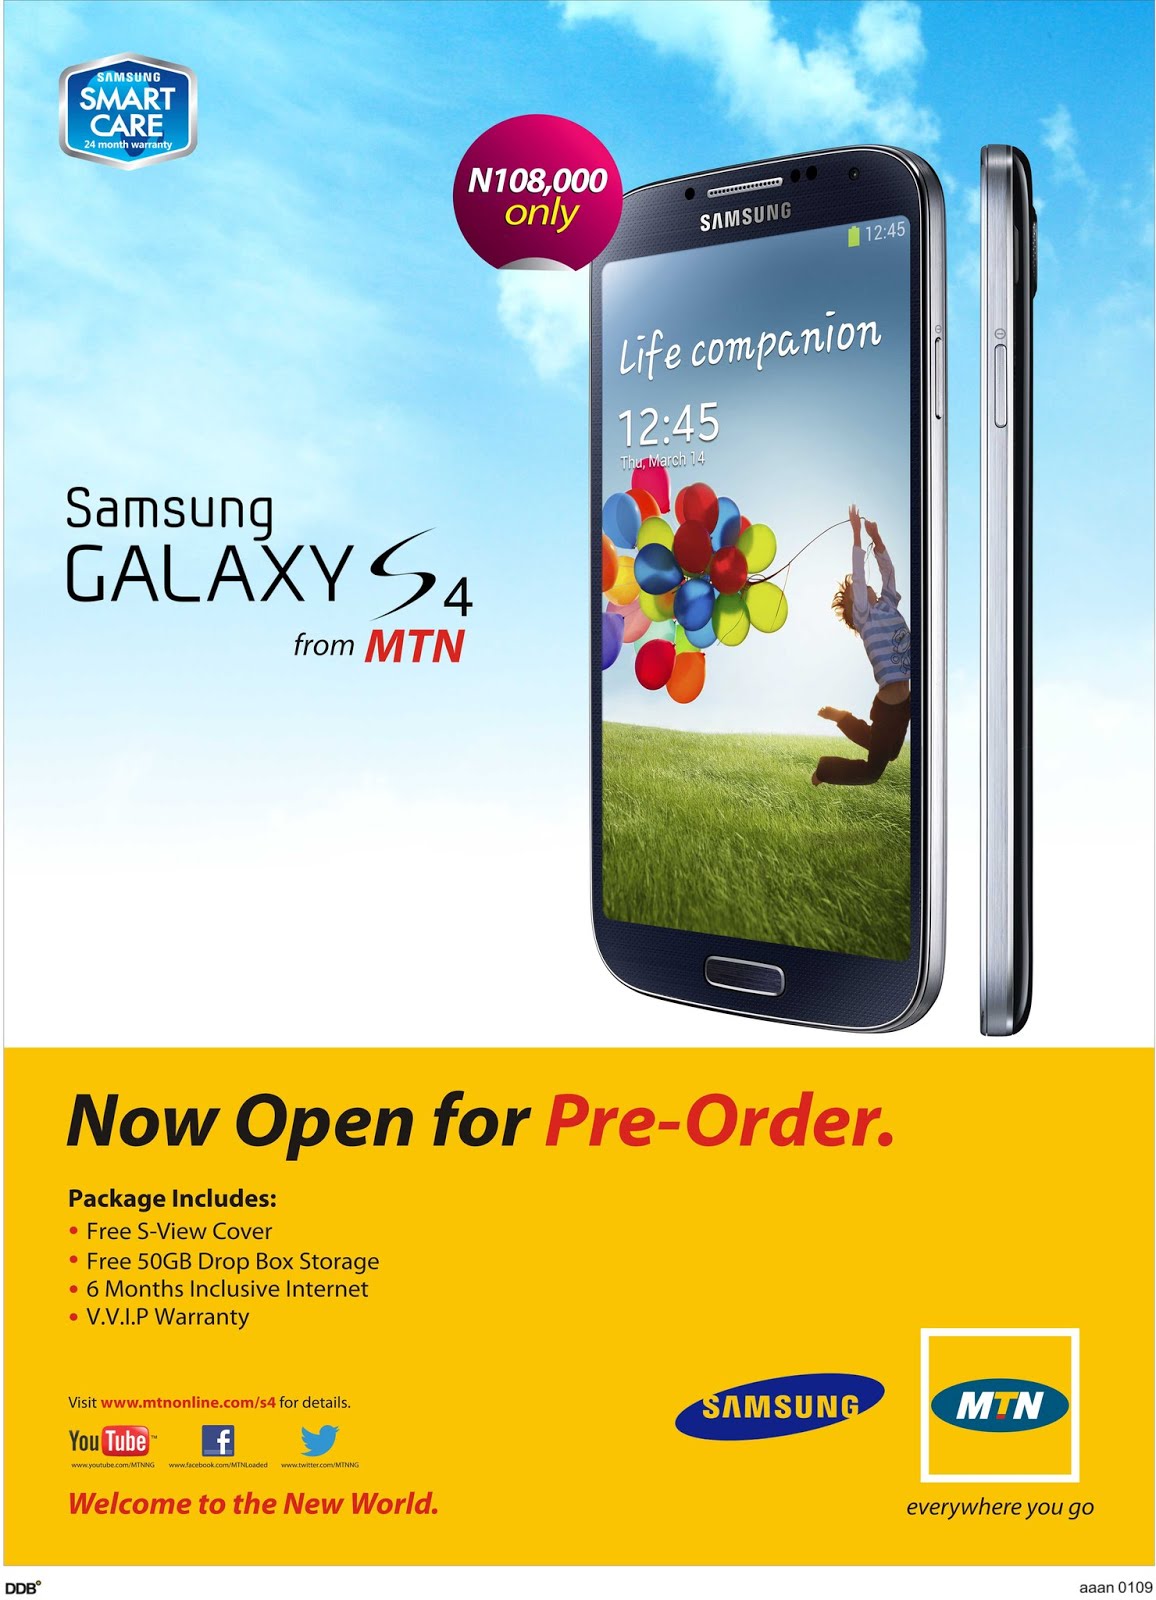 Welcome to Sod's Blog: Samsung Galaxy S4 from MTN (MTN Pre-order)